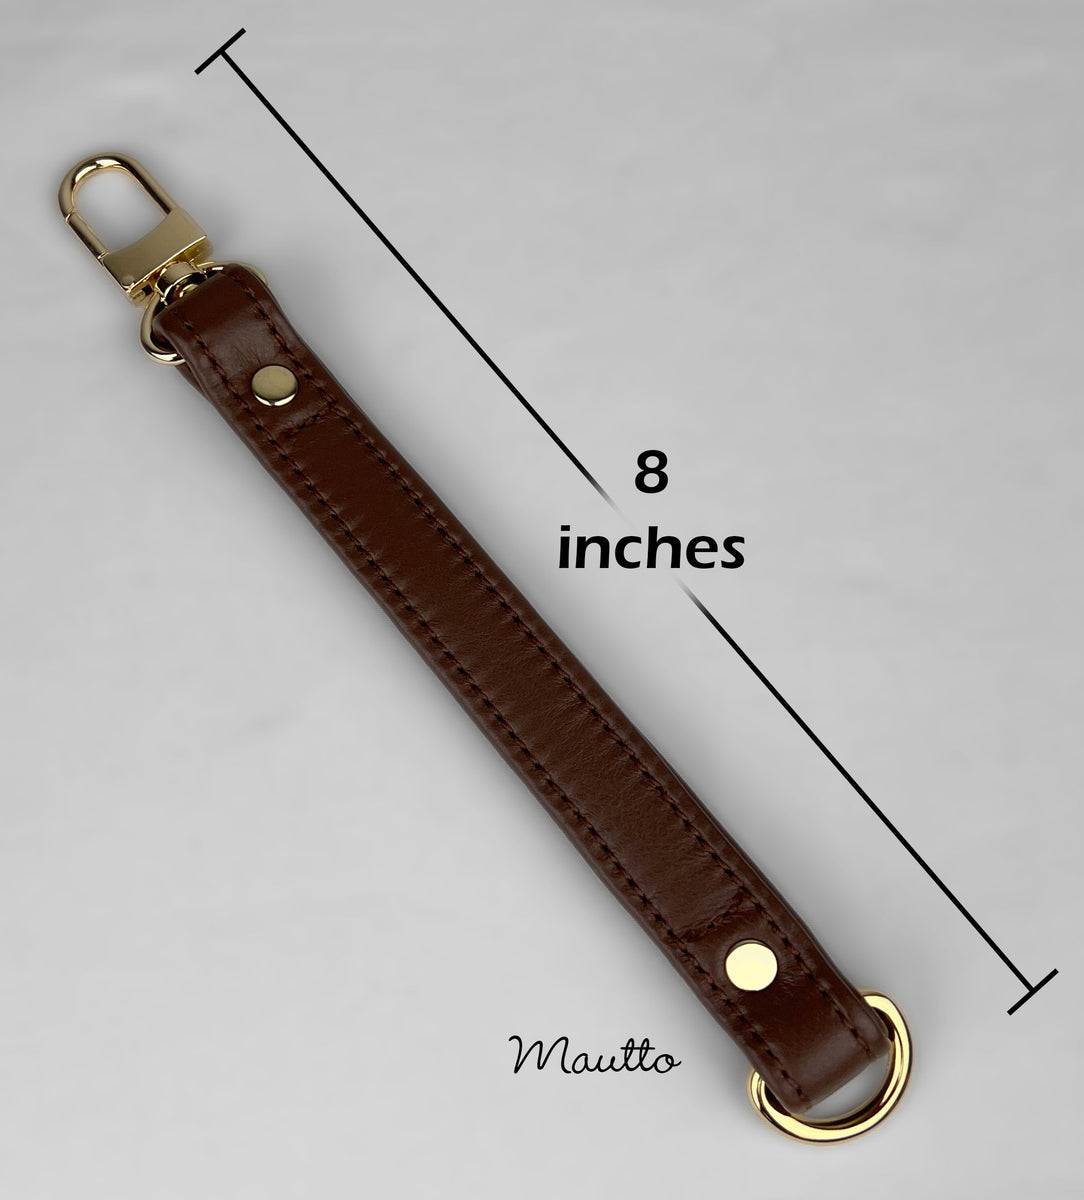 ON SALE! Genuine Leather Bag Strap - 1/2 Wide with Gold #16LG Clips -  Choose Length & Leather Color, Replacement Purse Straps & Handbag  Accessories - Leather, Chain & more